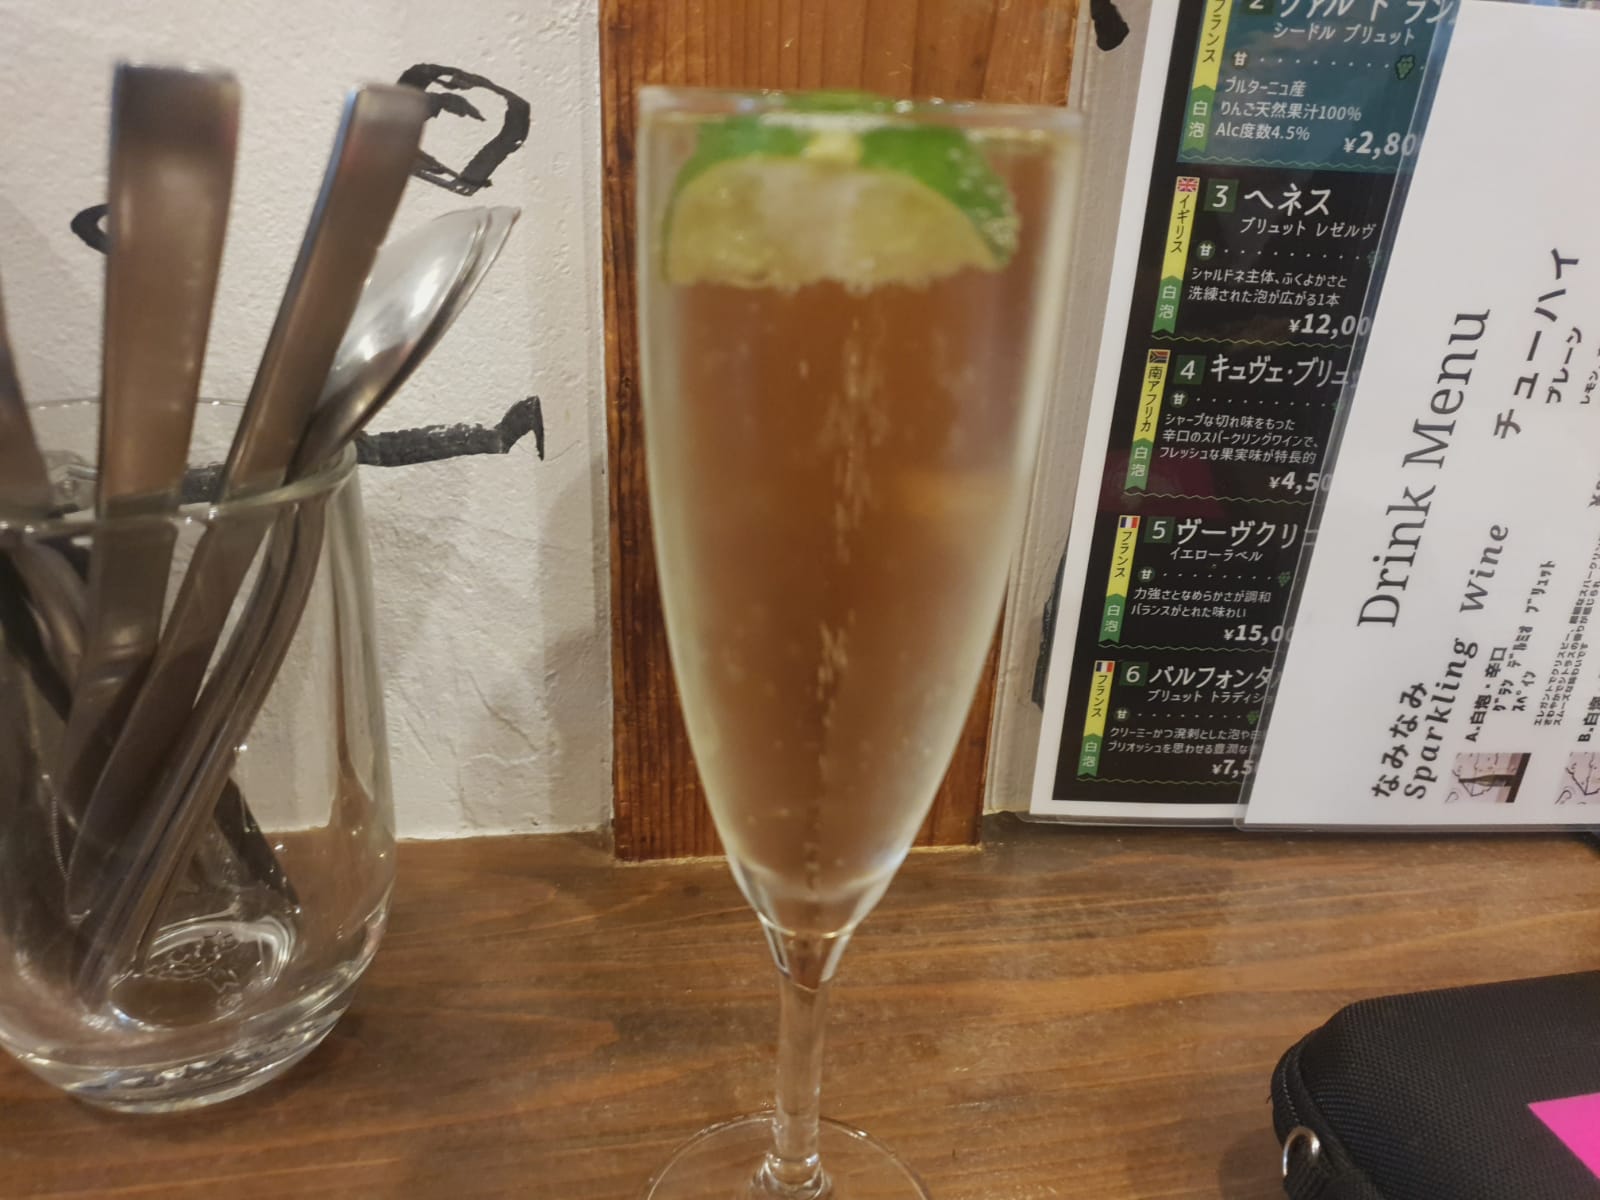 Sparkling wine with lime in it